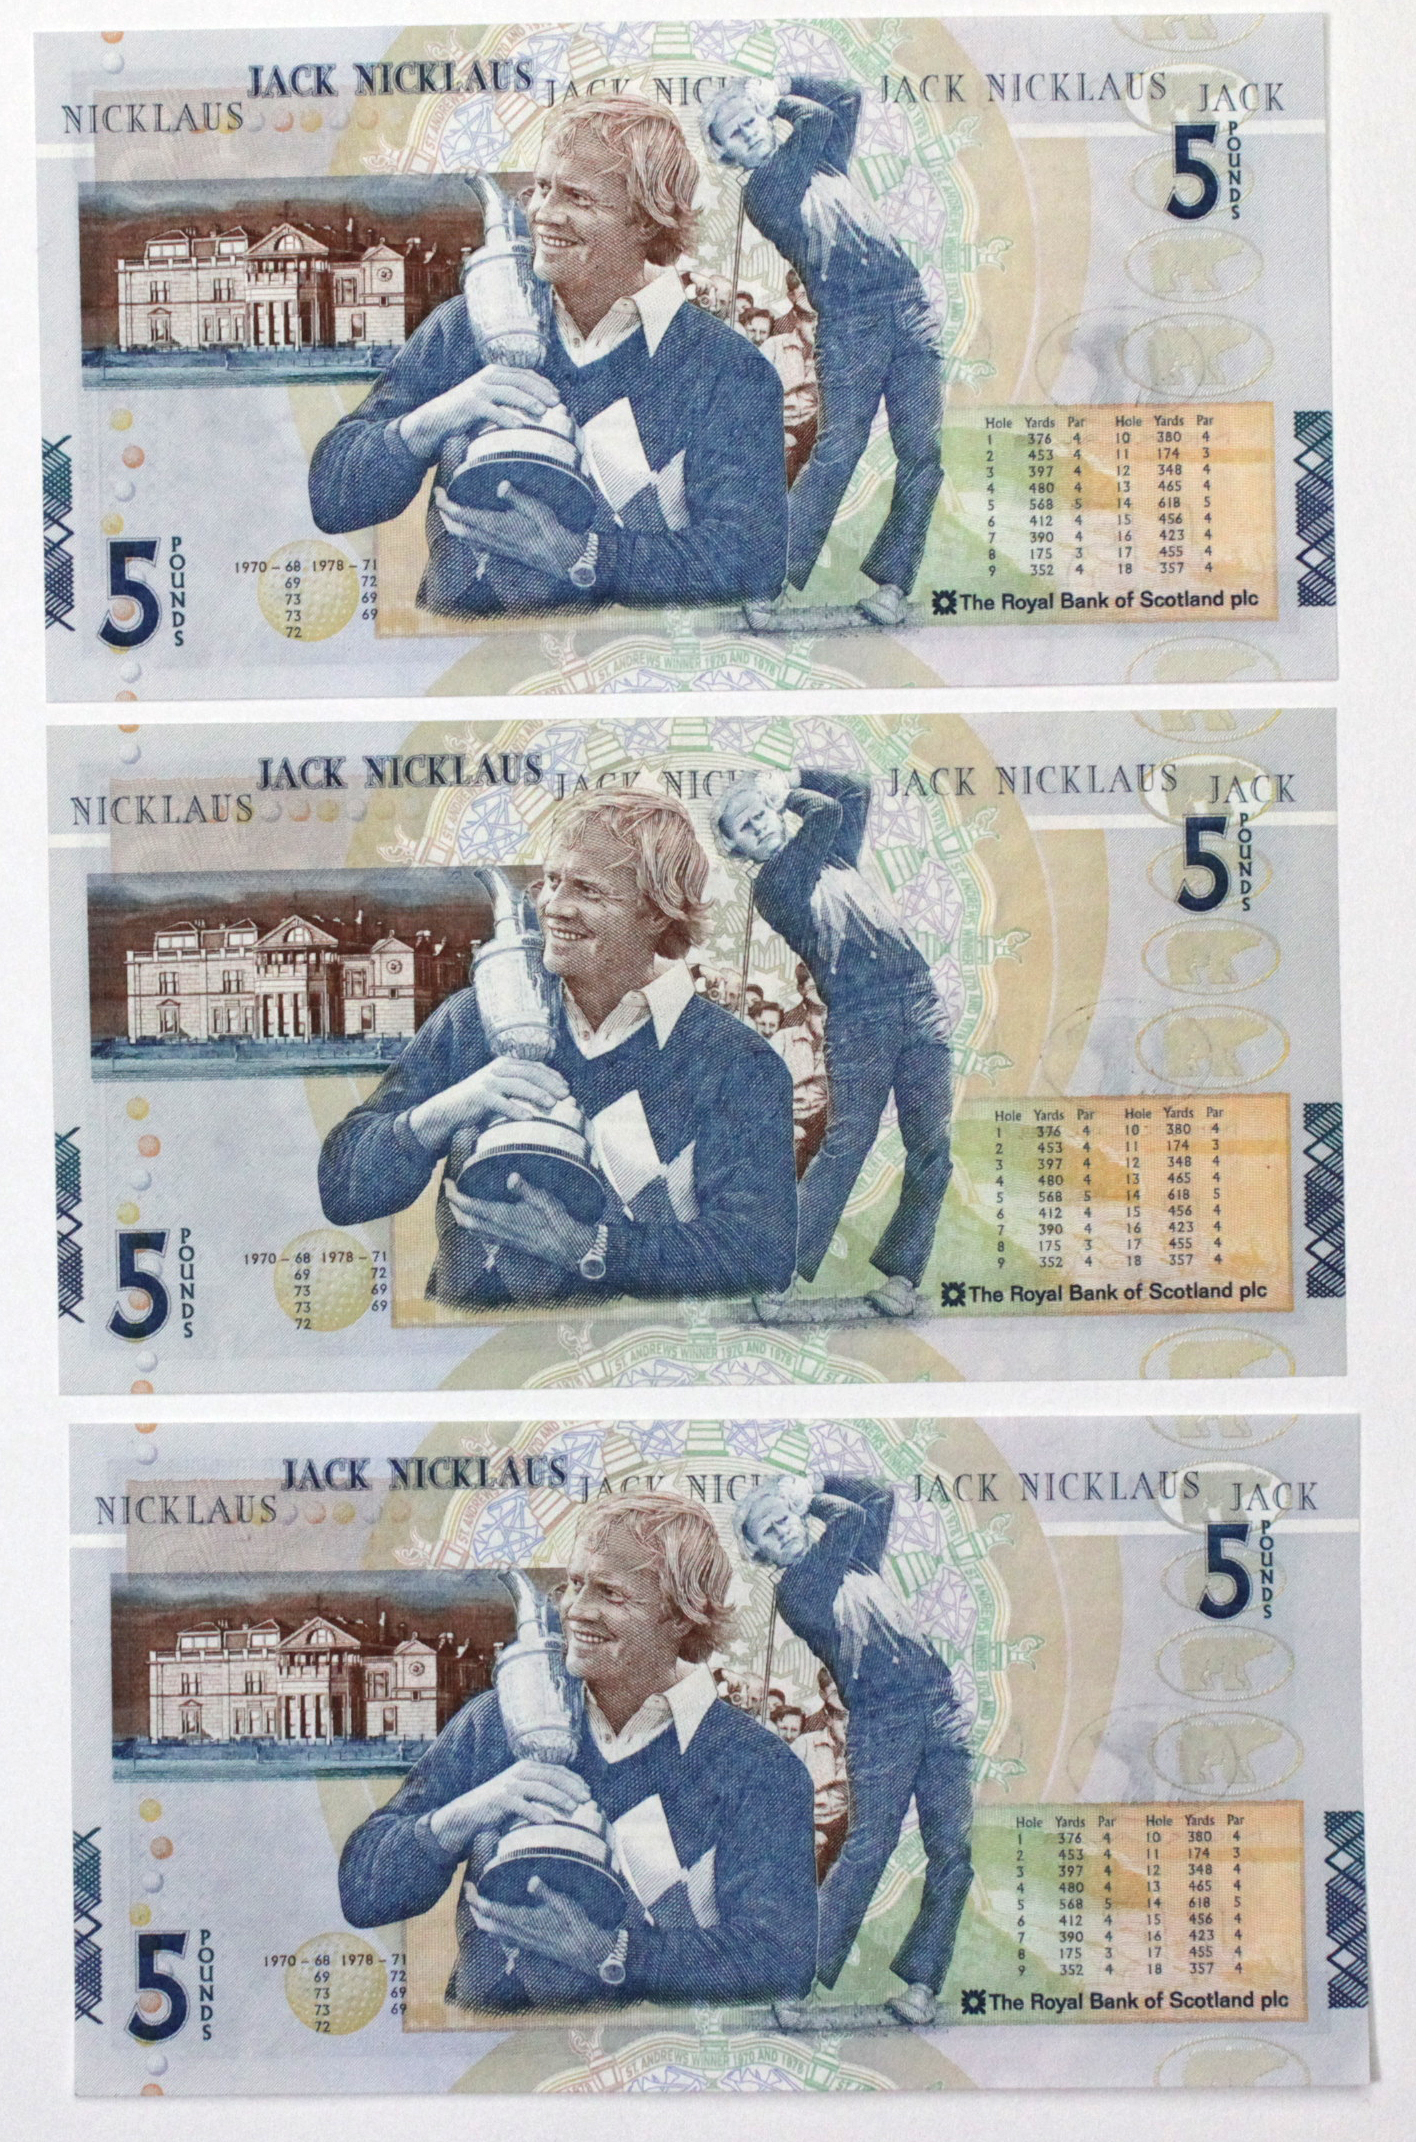 Scotland, Royal Bank of Scotland 5 Pounds (5), all Commemorative Jack Nicklaus dated 14th July - Image 3 of 3